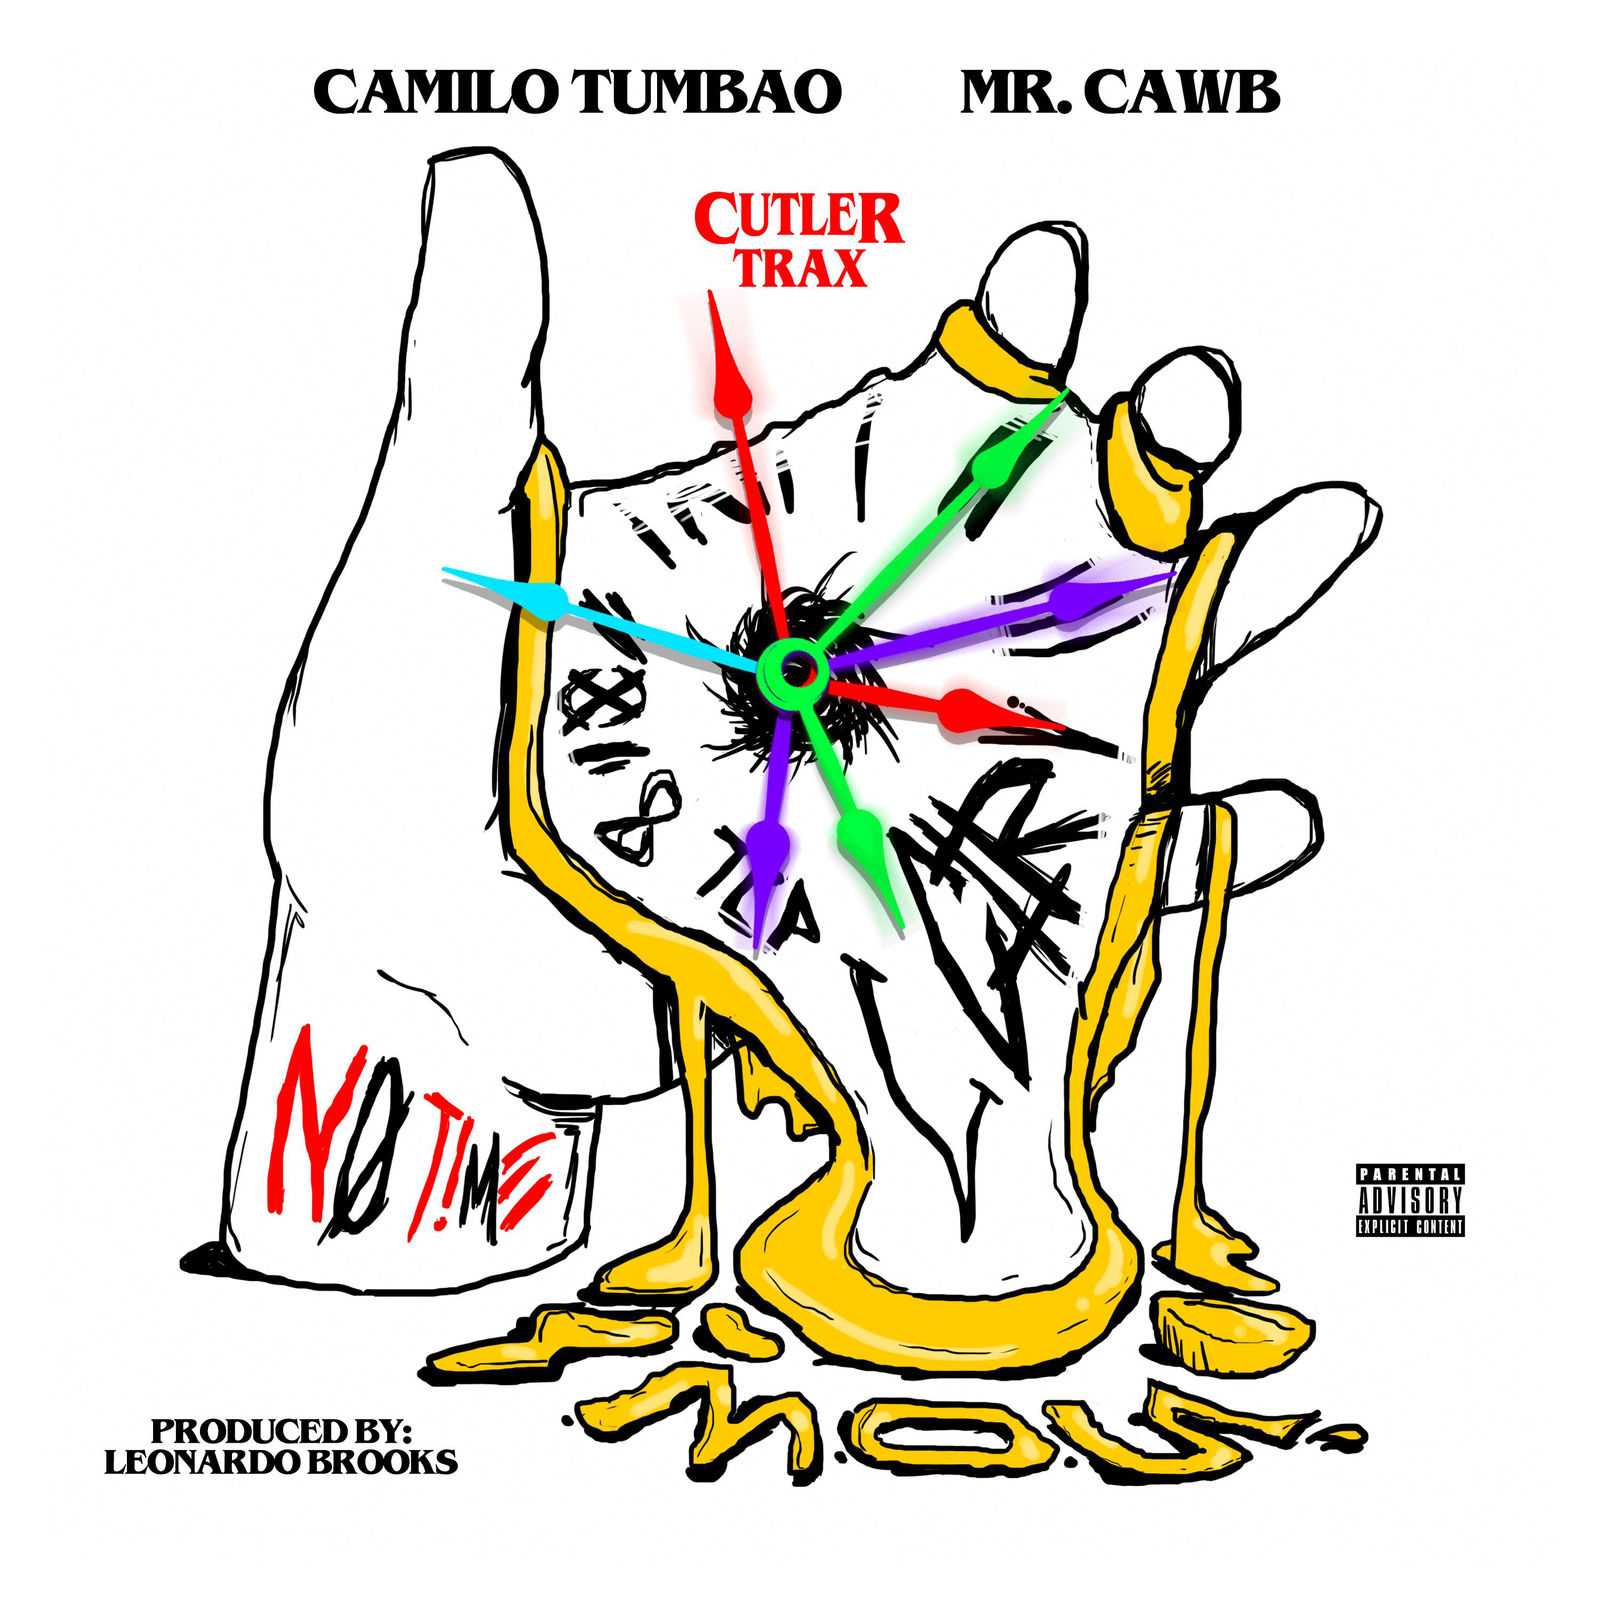 No Time (feat. Mr. Cawb)